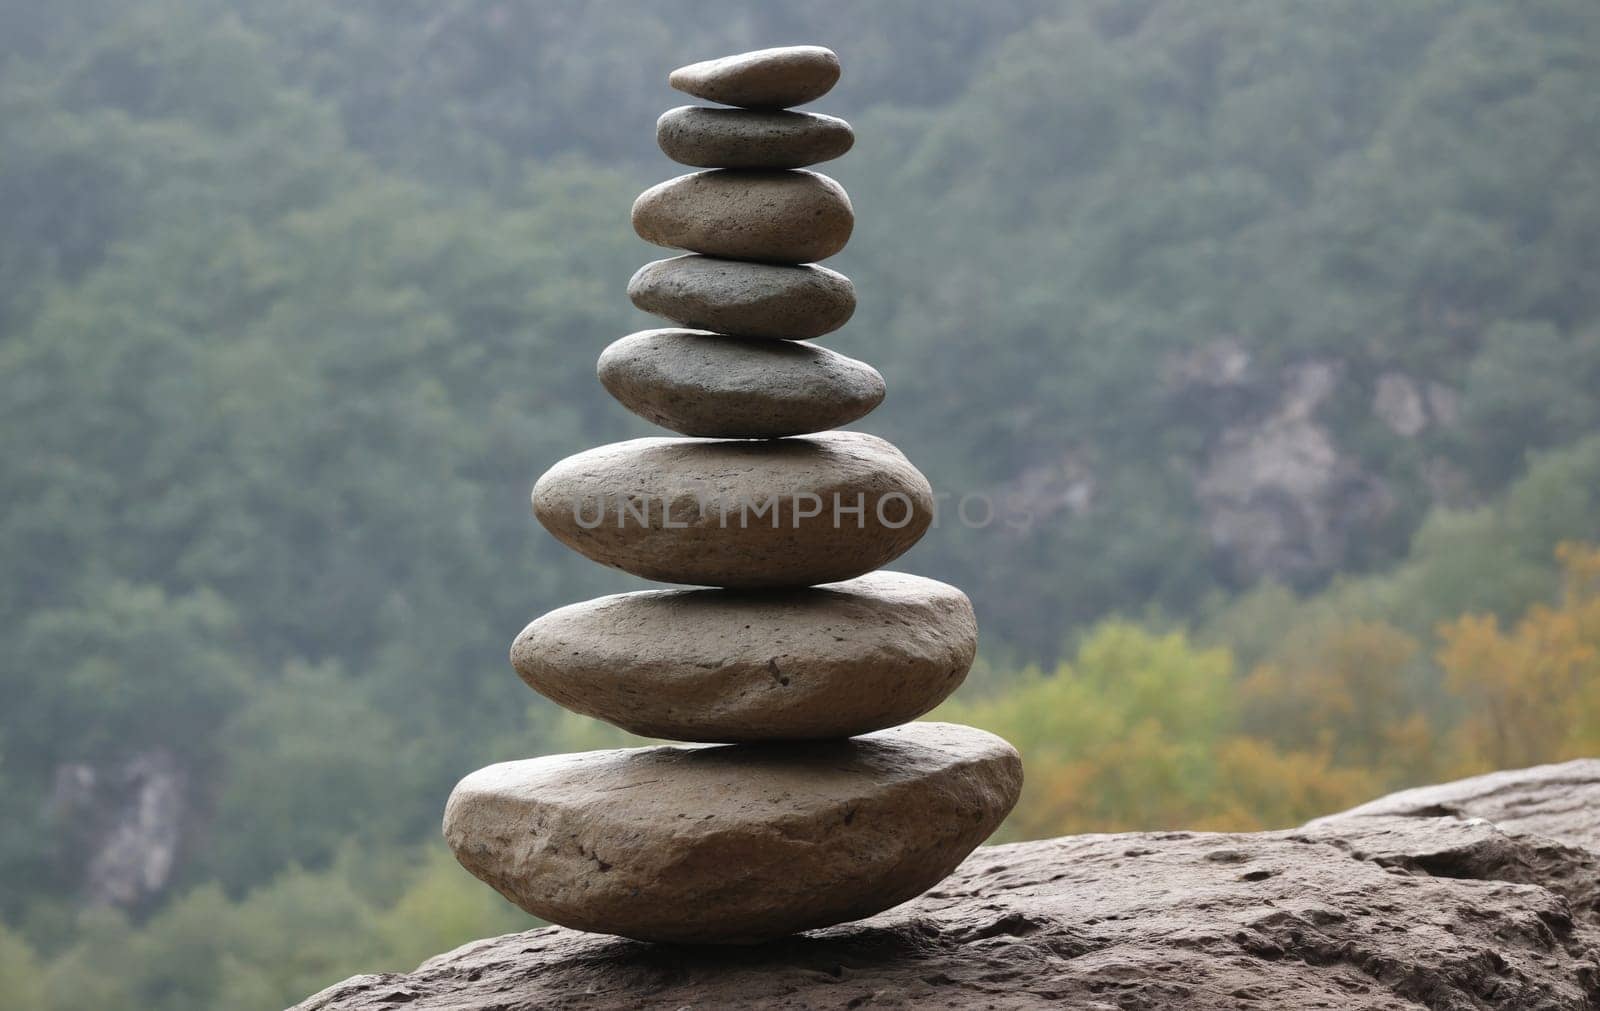 A stack of rocks balanced on a gravel road, creating a natural landscape sculpture. The clouds above and grass below add to the environmental art